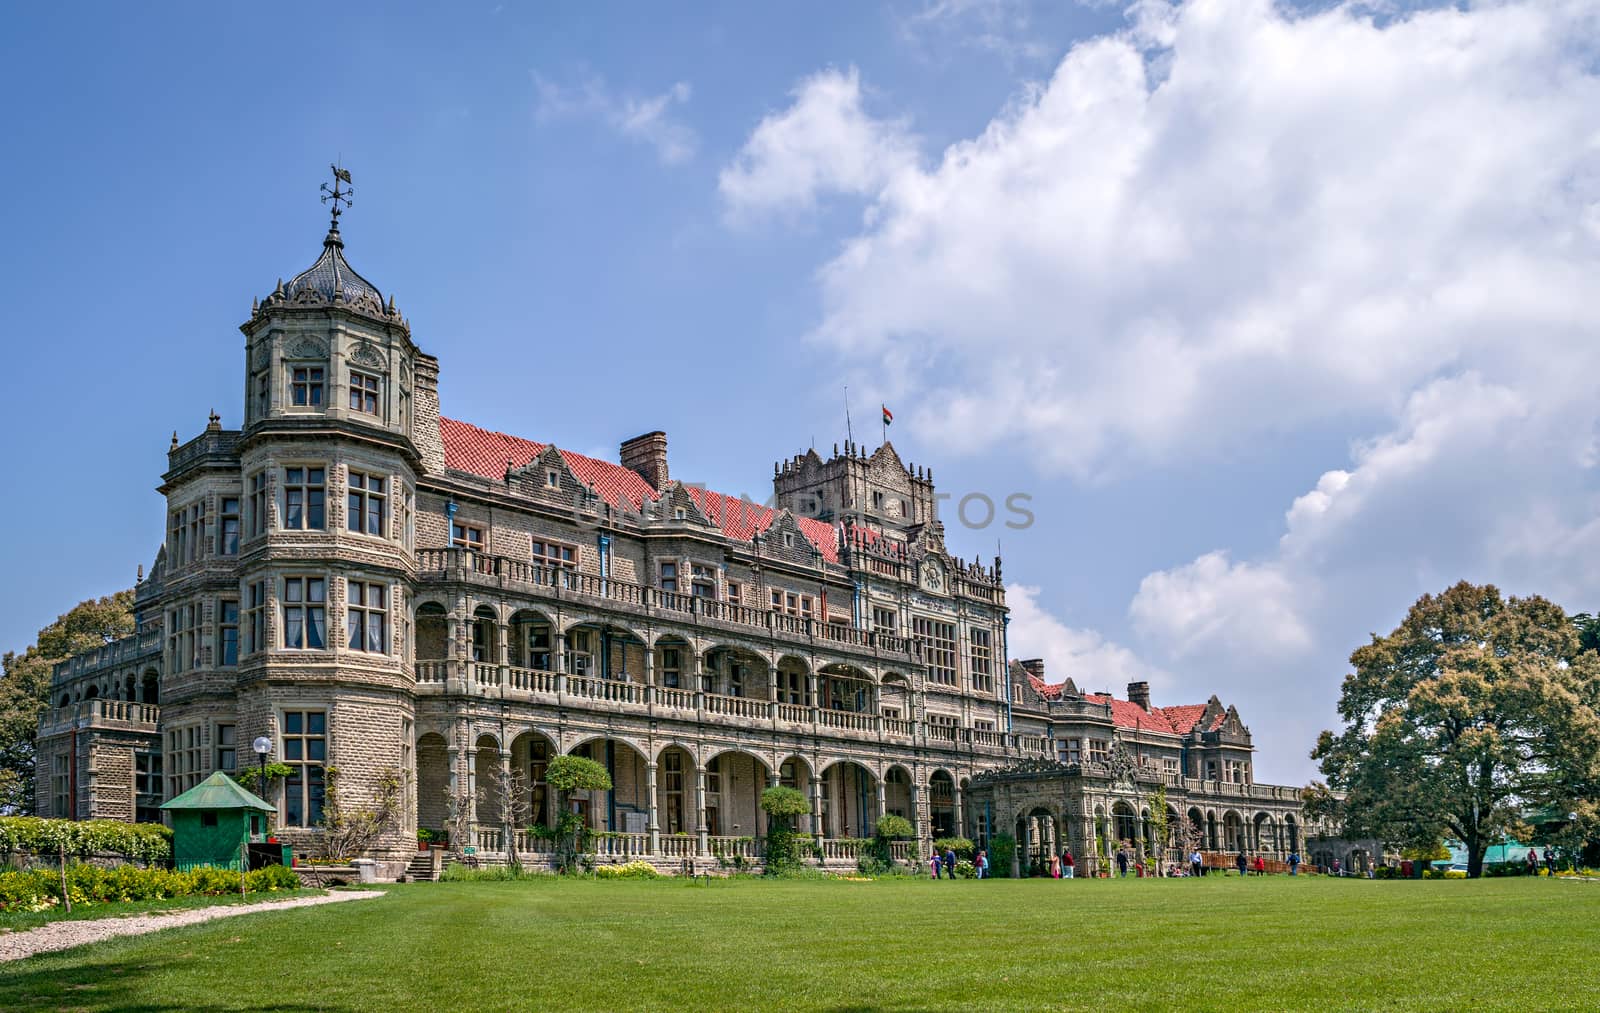 Former residence of the British Viceroy of India - Viceregal Lodge, Shimla, Himachal Pradesh, India by lalam